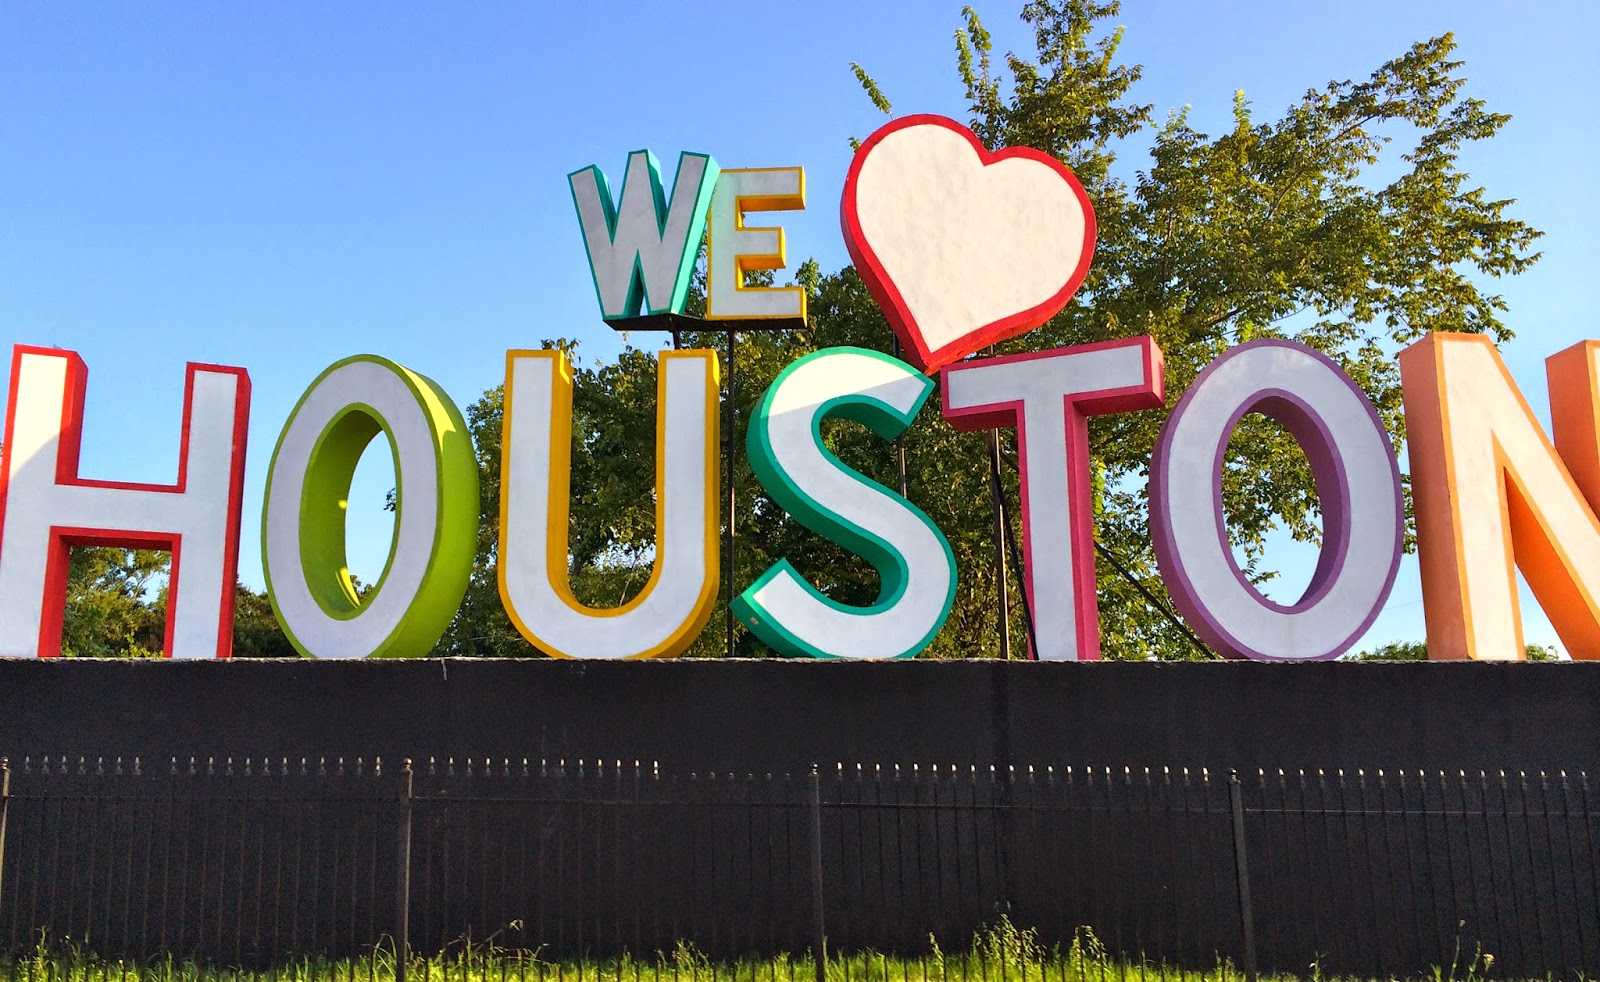 David Adickes' "We Heart Houston" Sign is on the Move | Glasstire